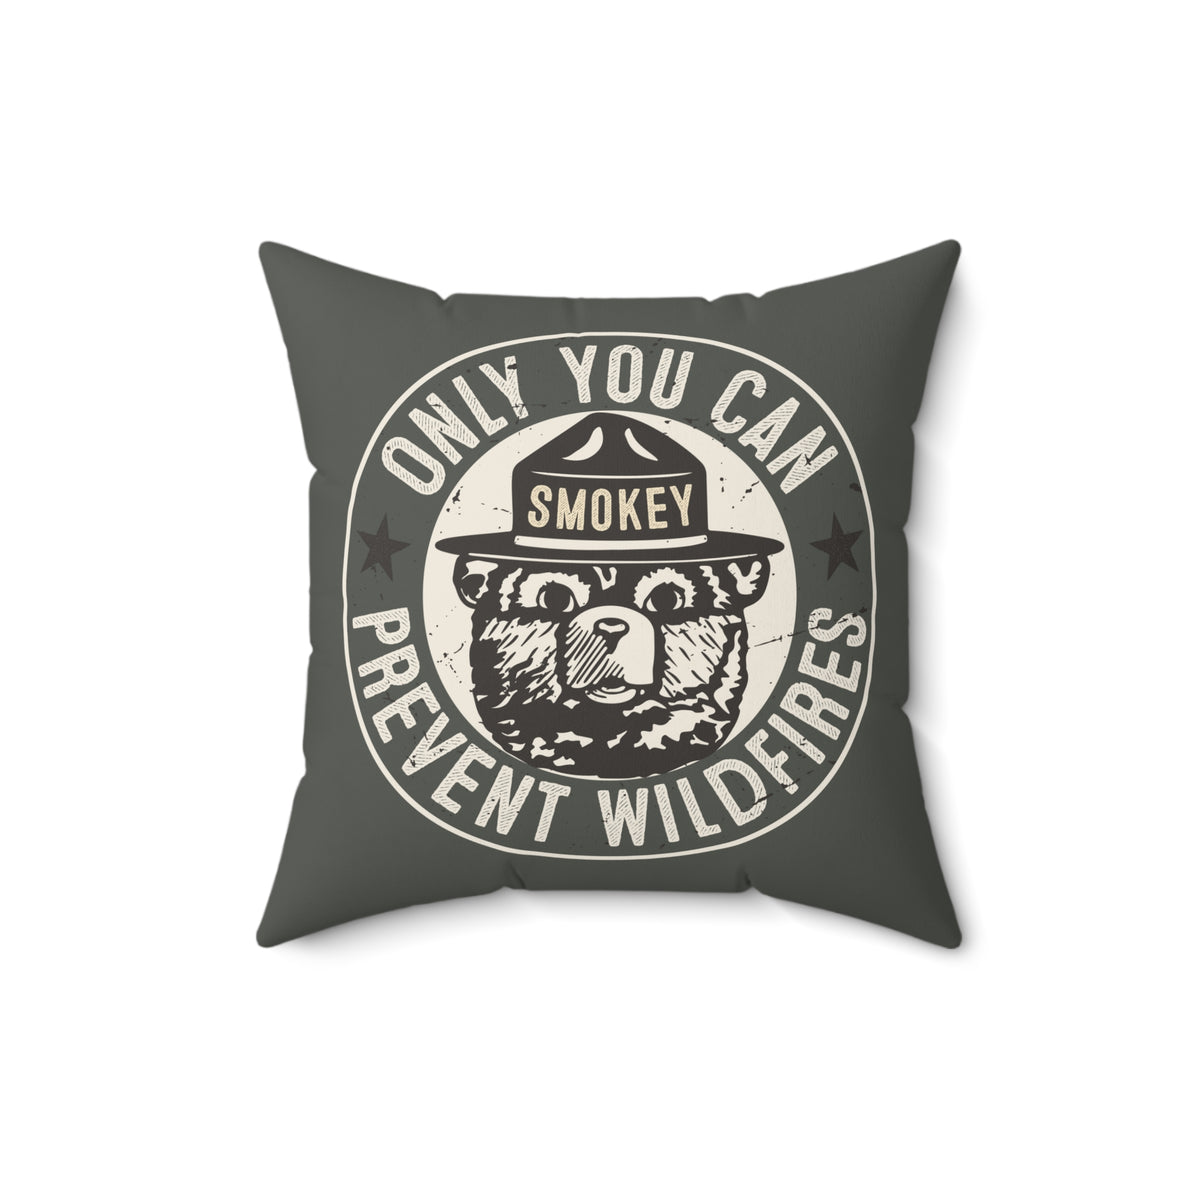 Smokey Bear Prevent Wildfire Camping Pillow | Camping Home Decor | Faux Suede Square Pillow